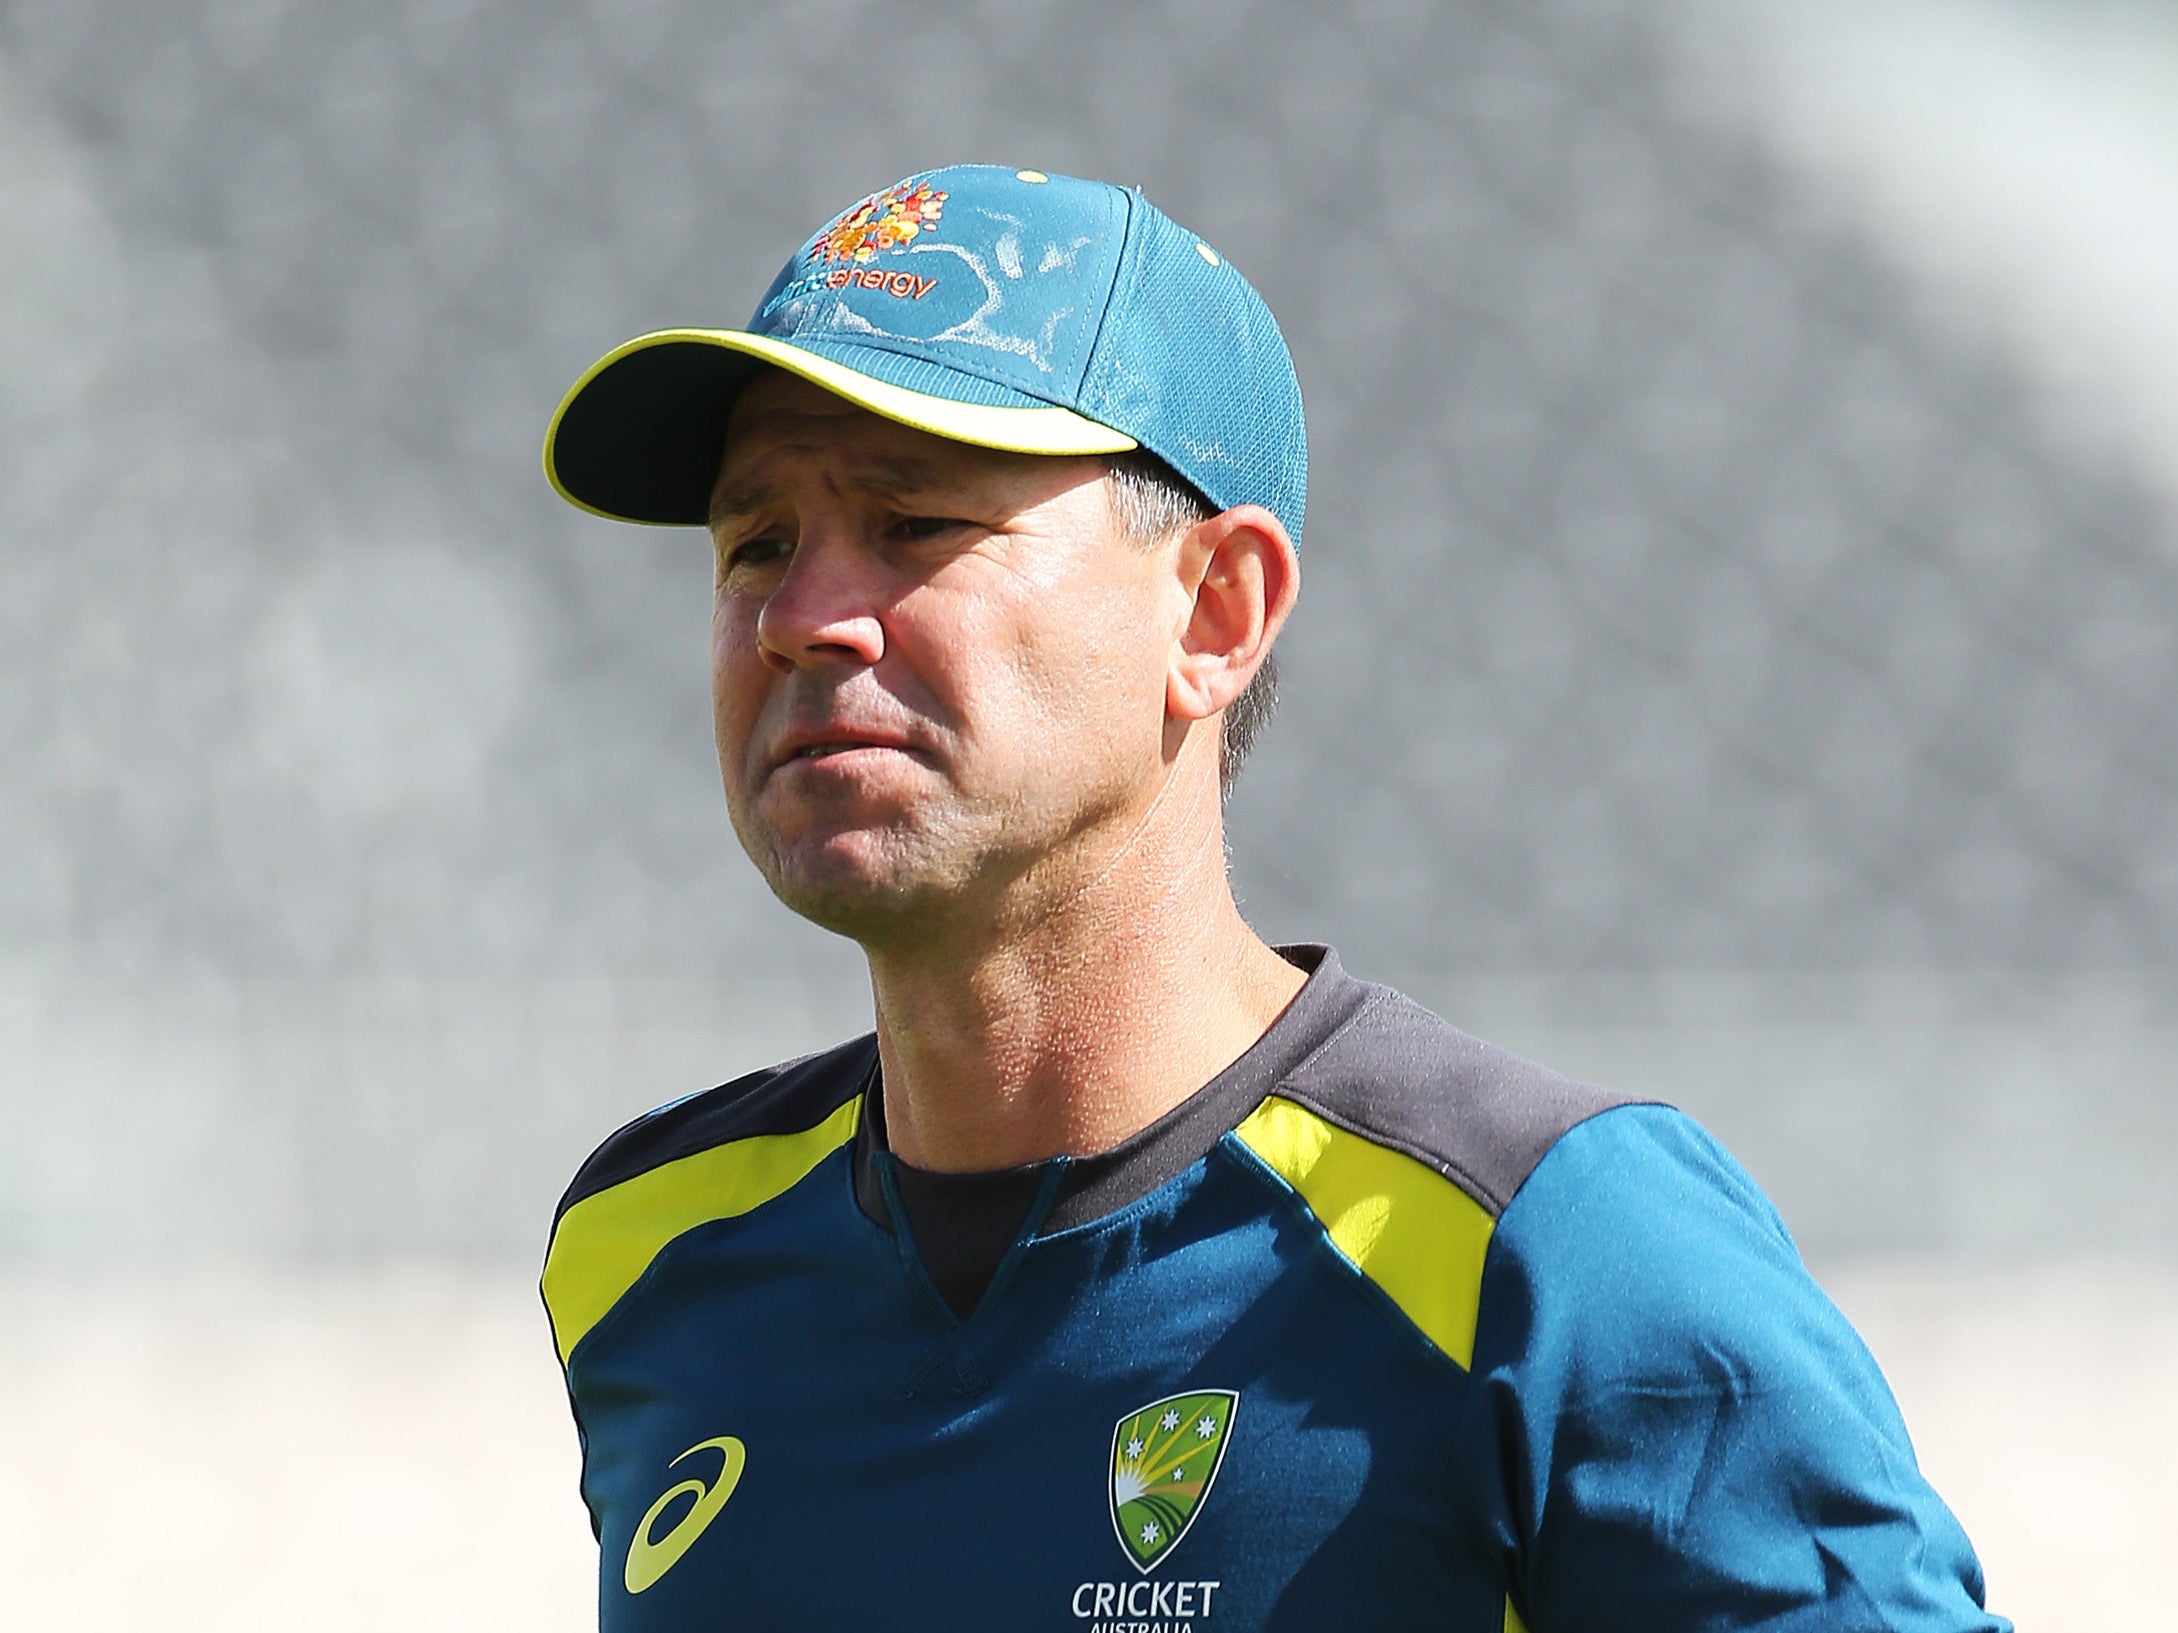 Former Australia captain Ricky Ponting had a warning for England